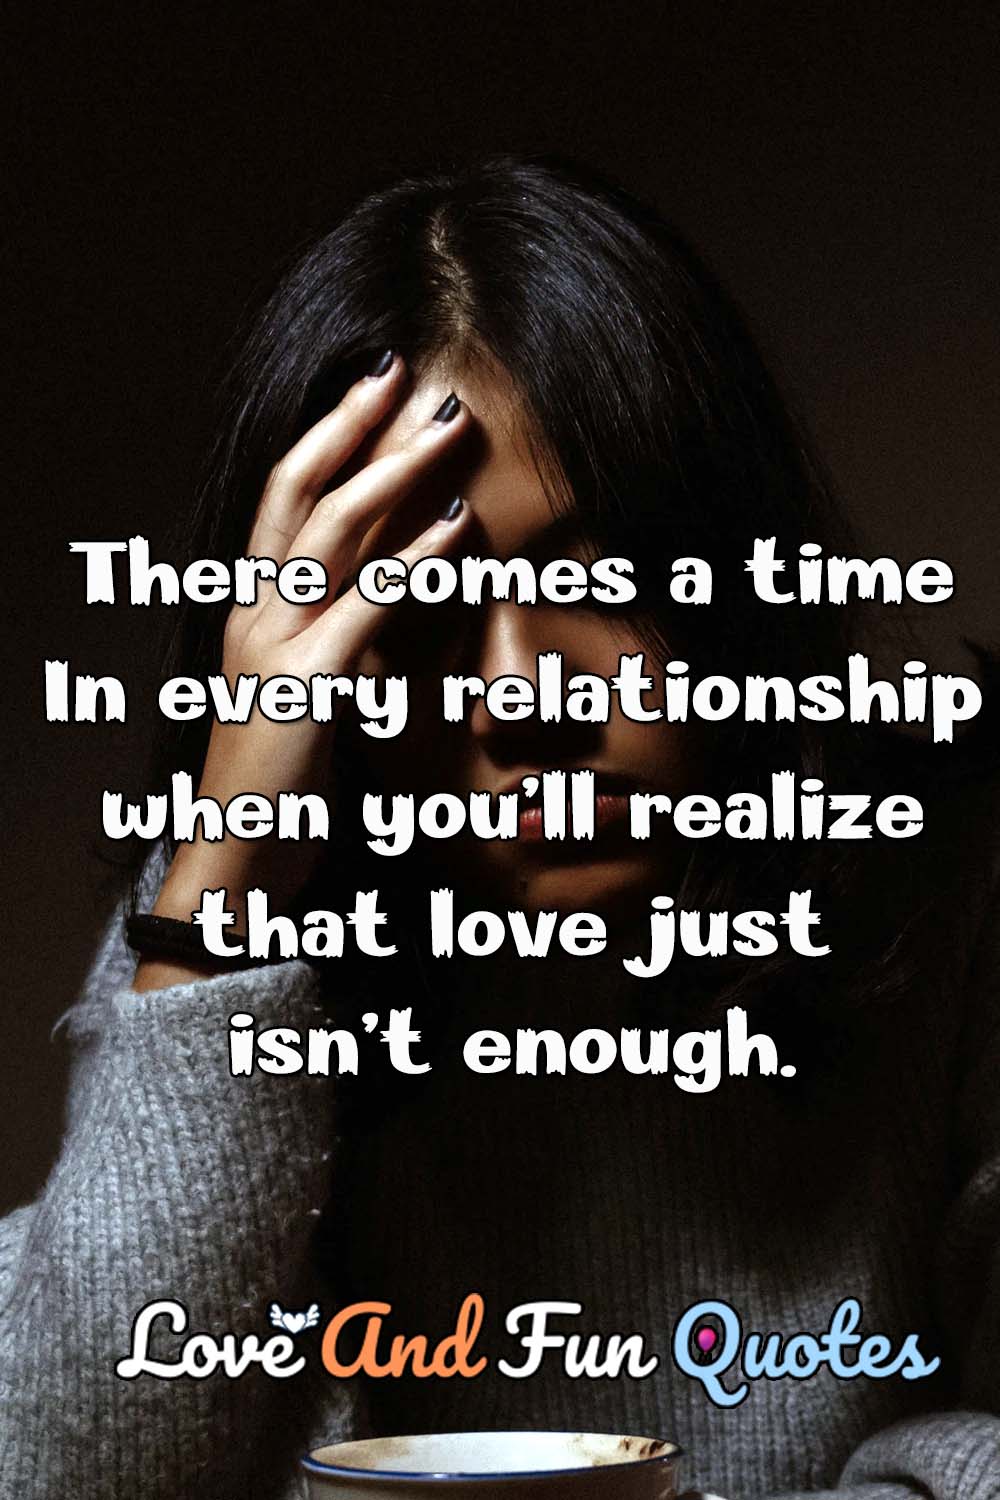 There comes a time in every relationship when you’ll realize that love just isn’t enough.-Anonymous